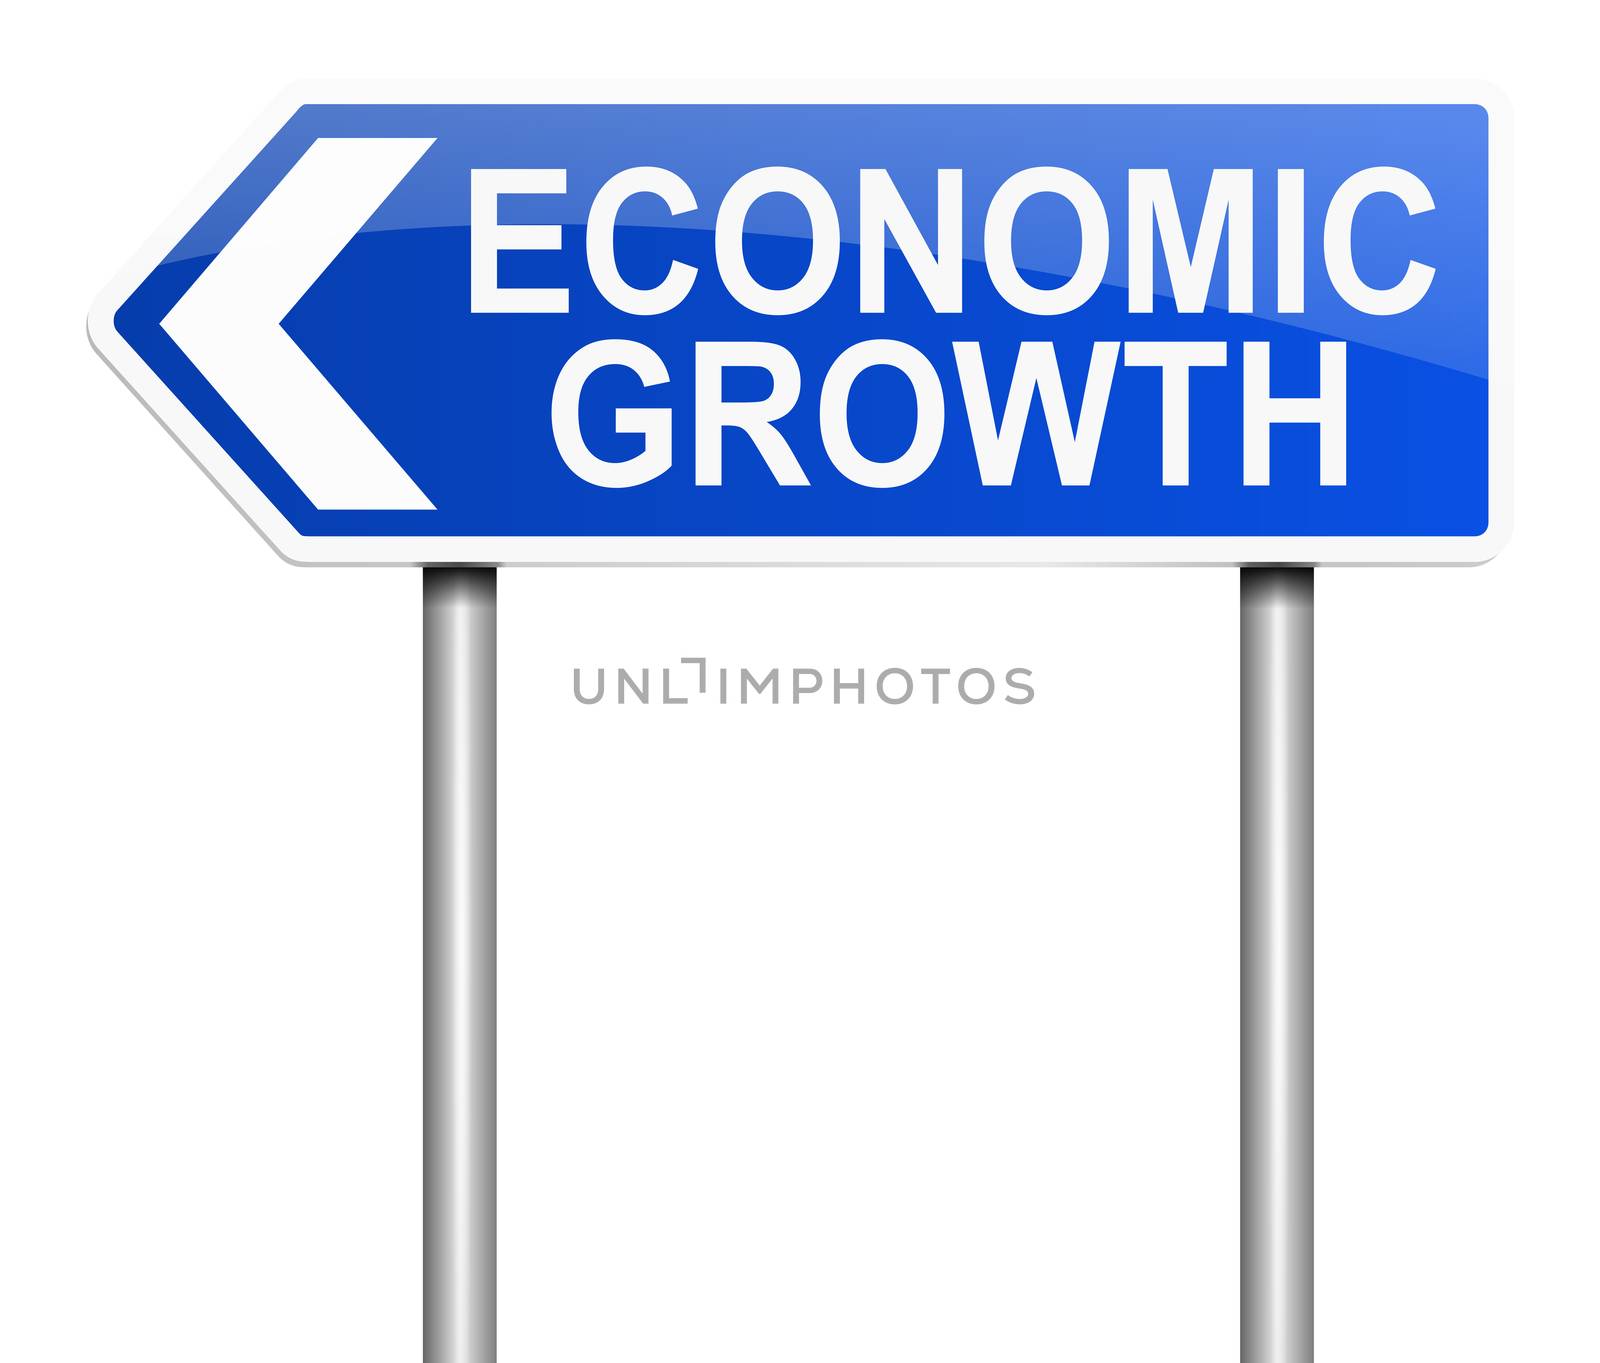 Illustration depicting a sign with an economic growth concept.